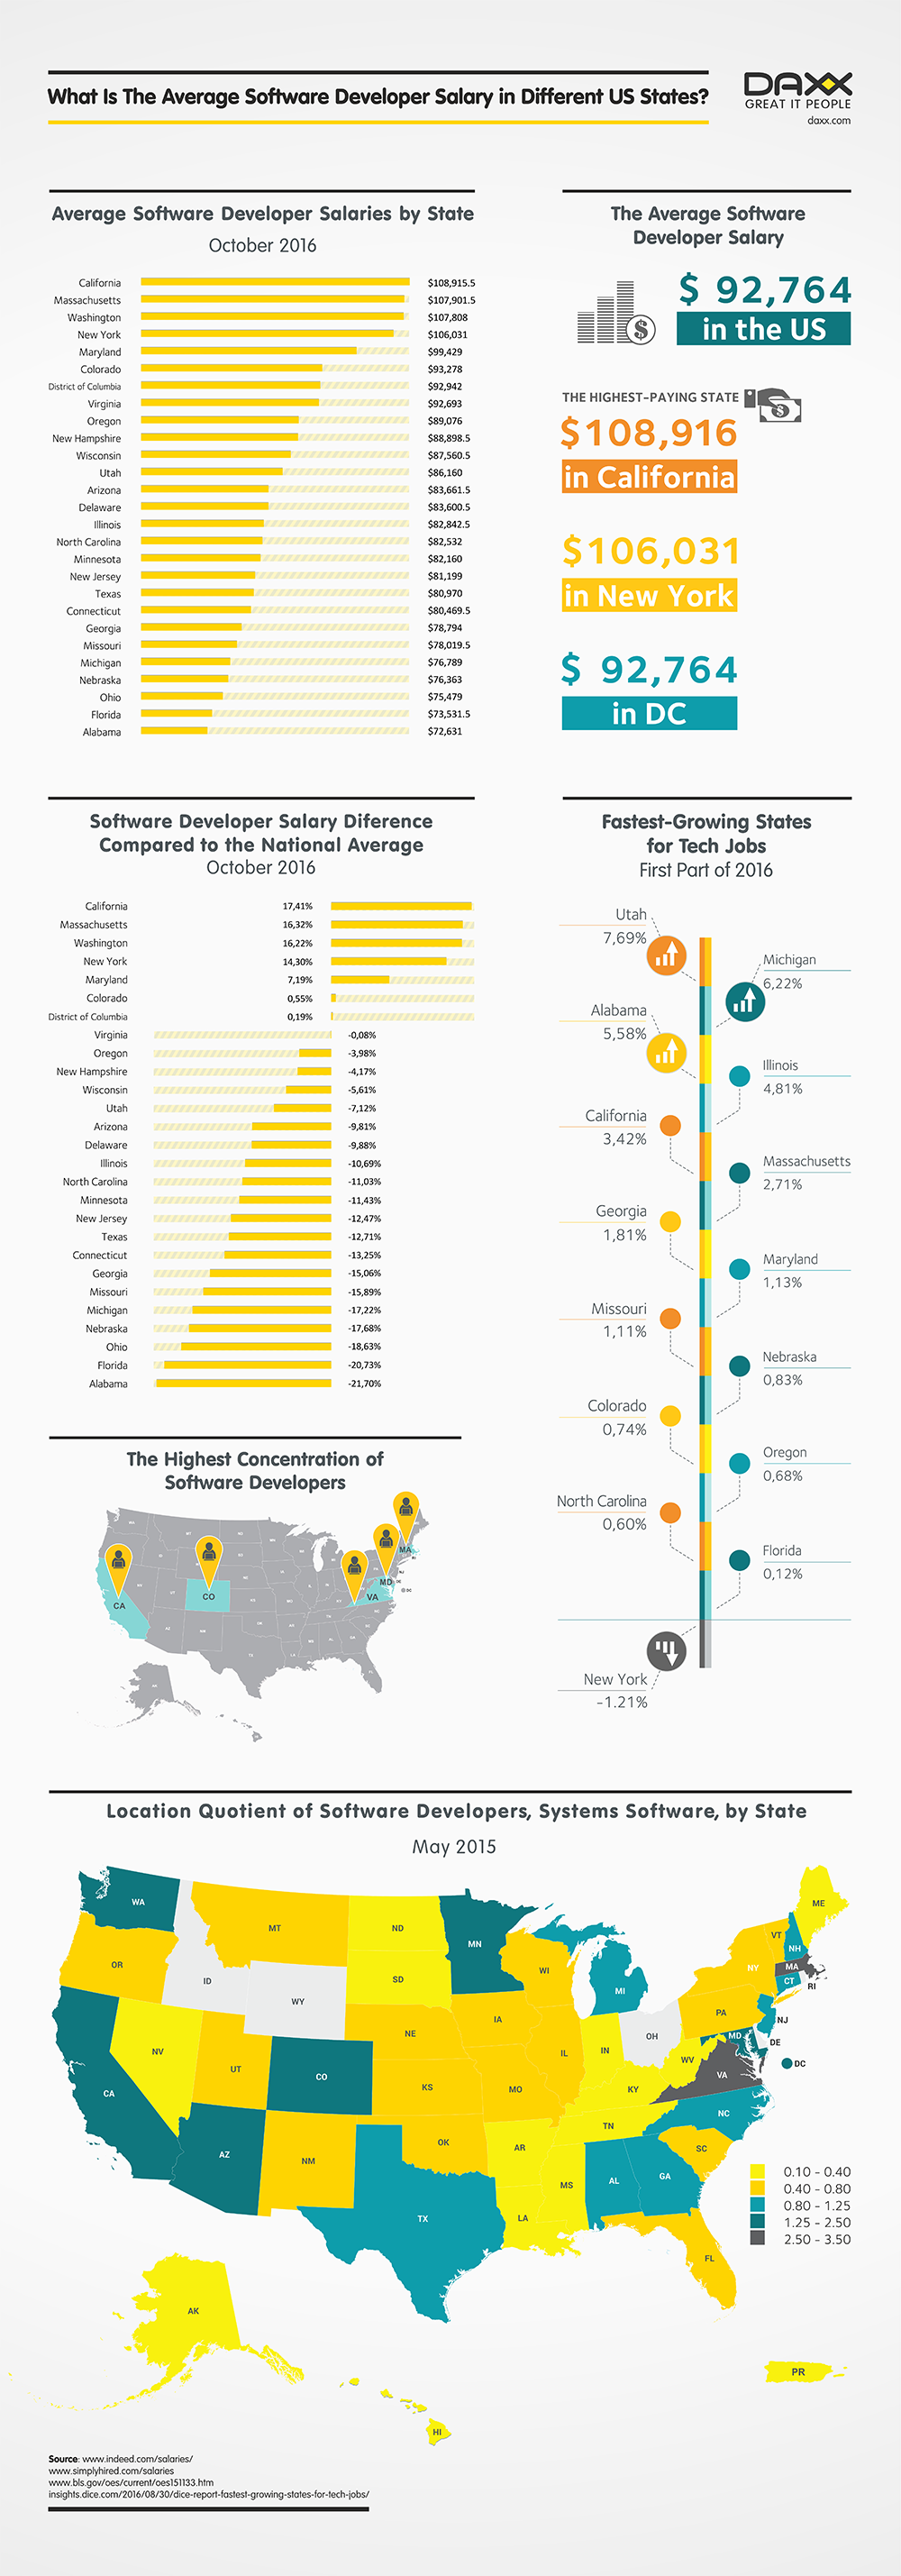 The Average Software Developer Salary in Different US States (2016)